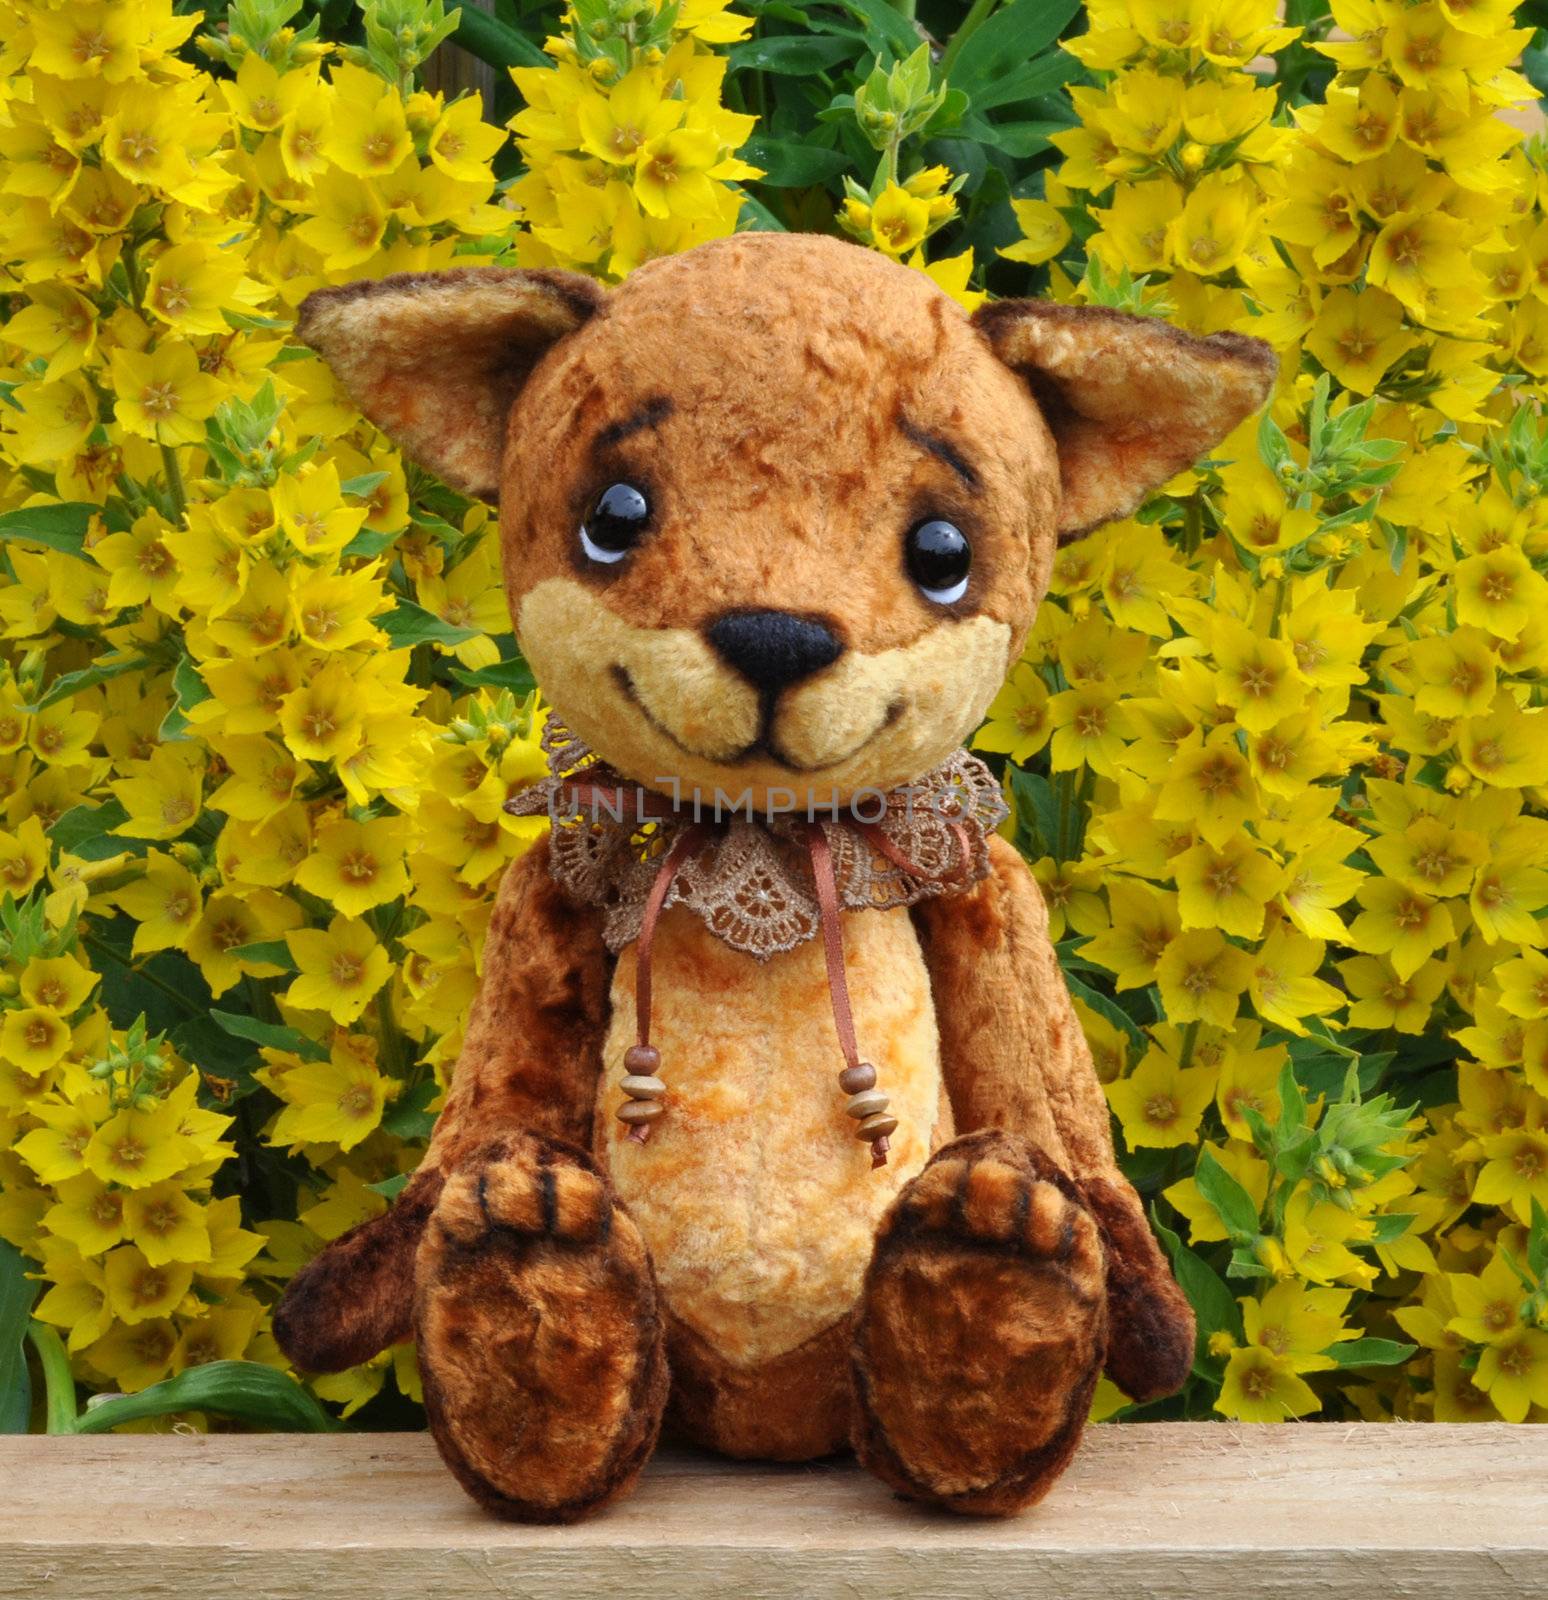 Handmade, the sewed plush toy: Ron fox cub on a board among flowers